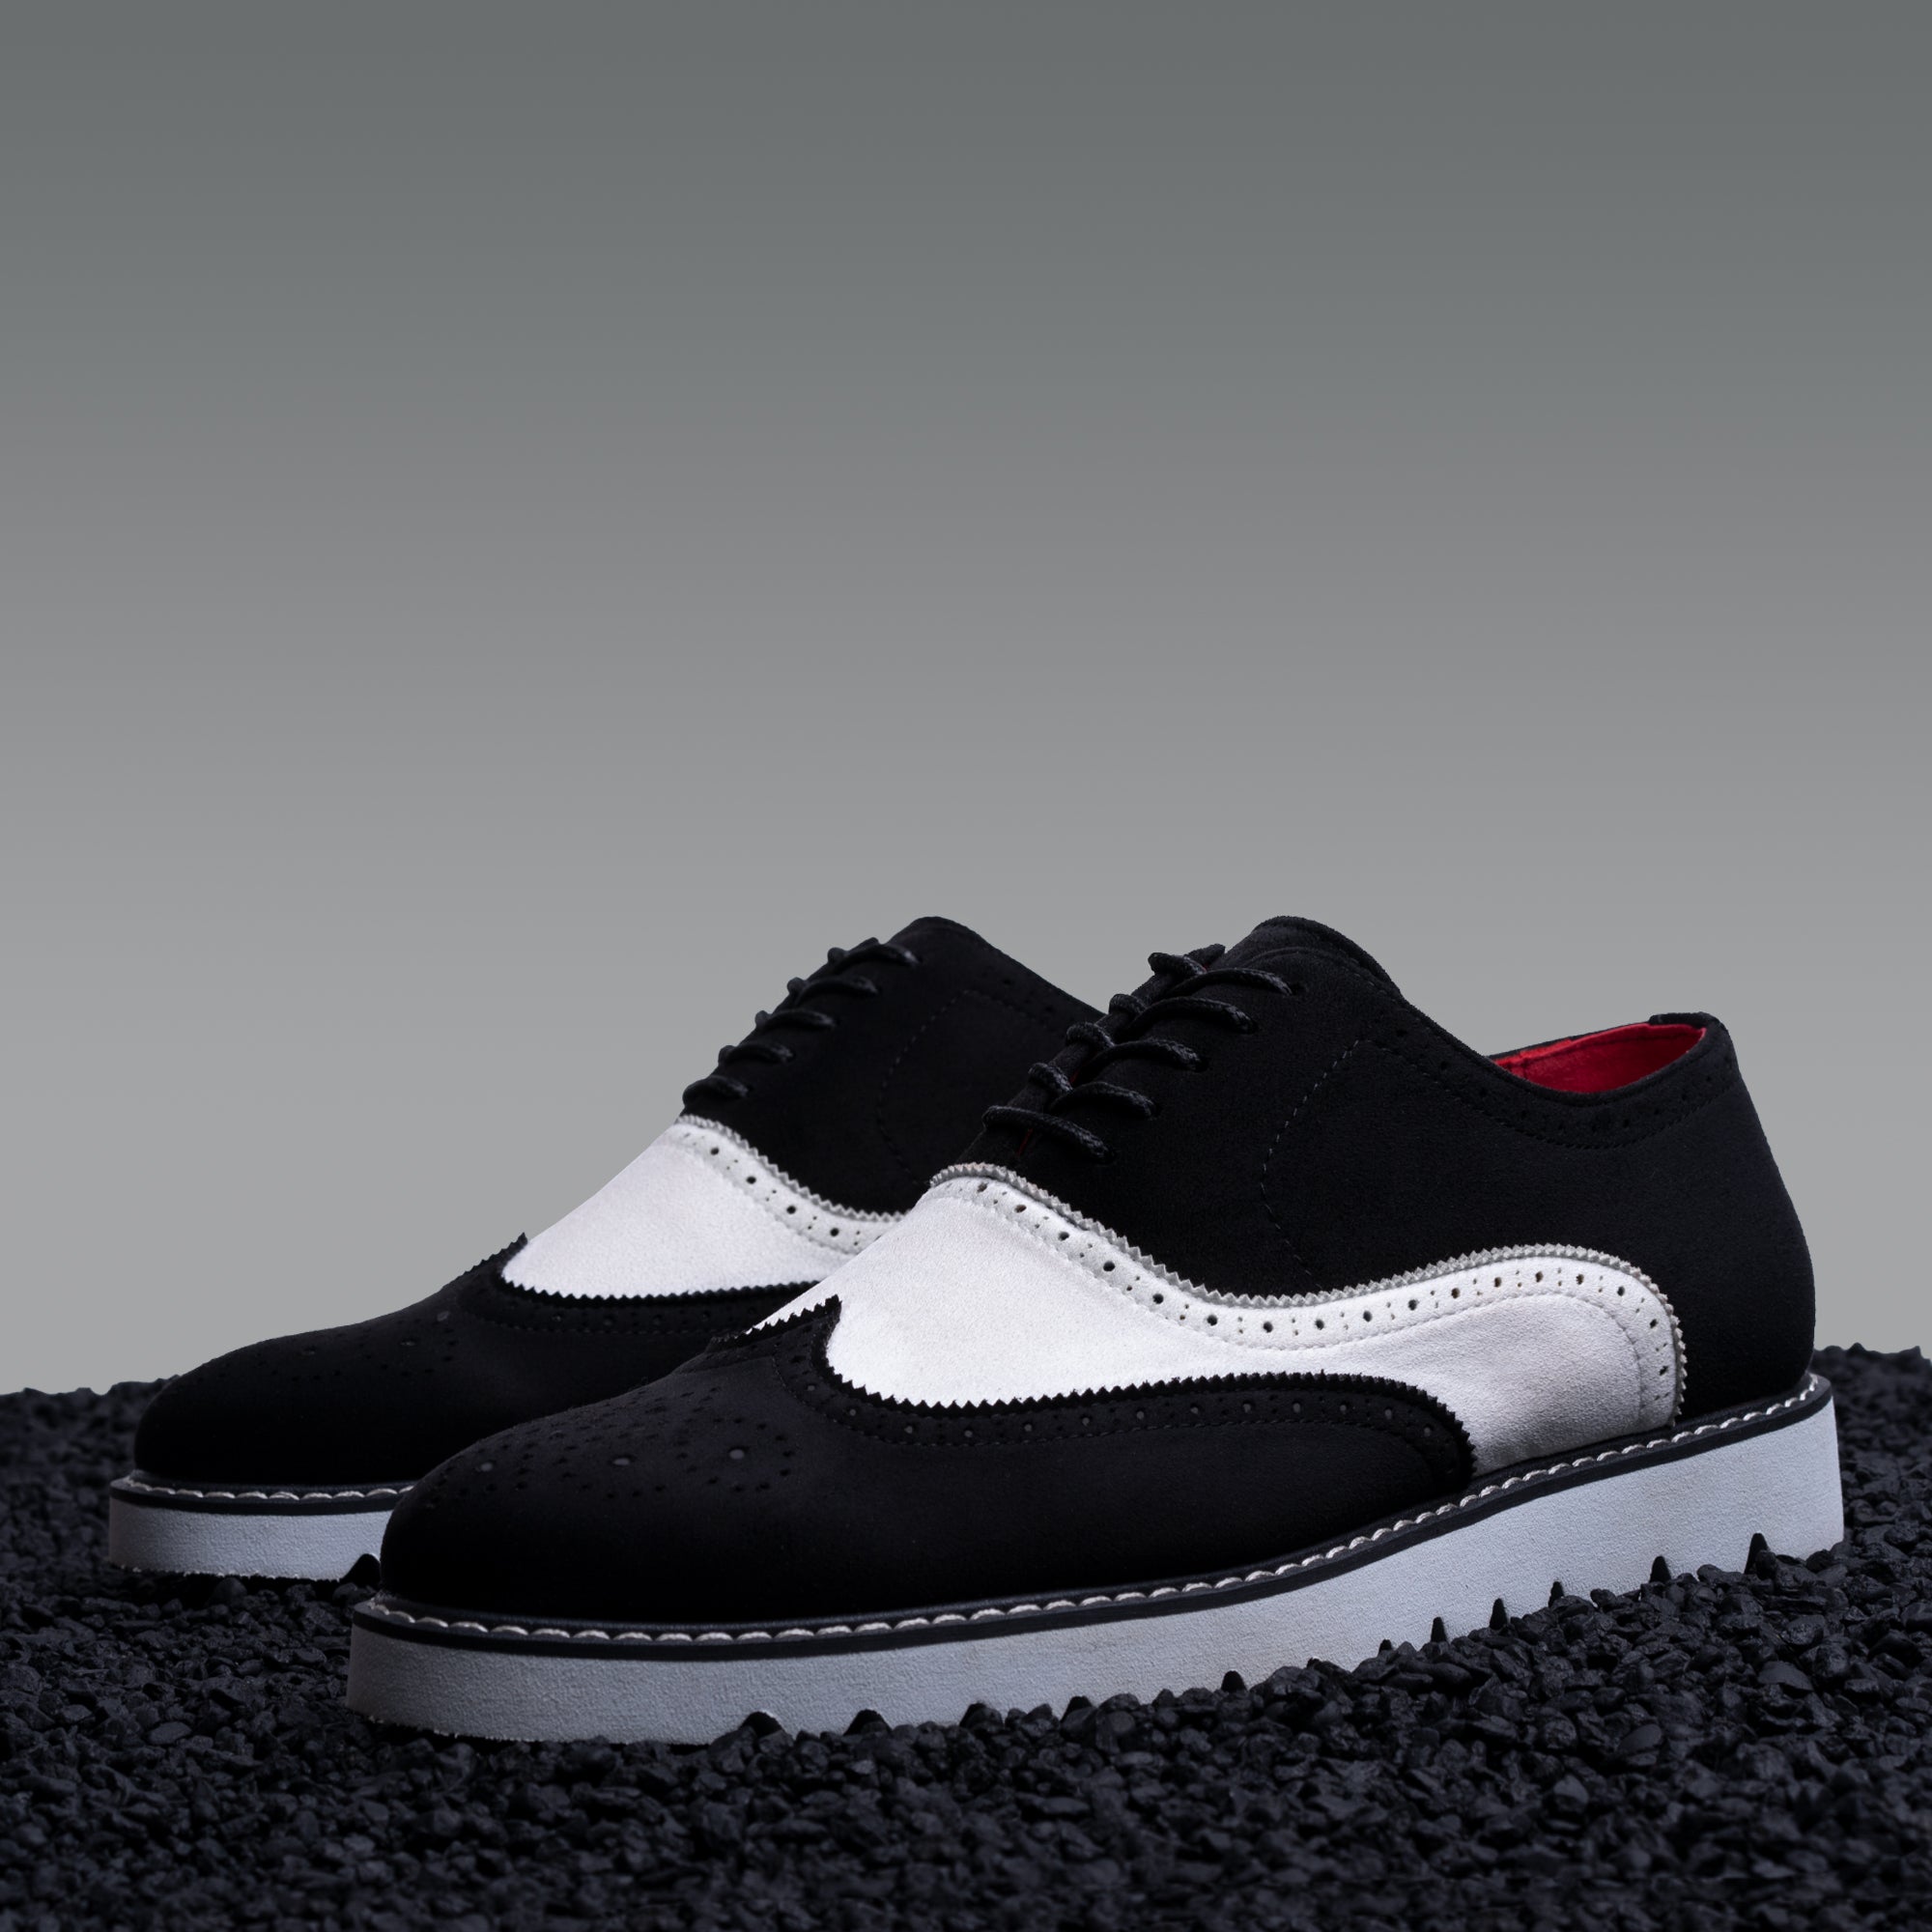 The Paragon Casual Wingtip Oxford Sneaker Black/White